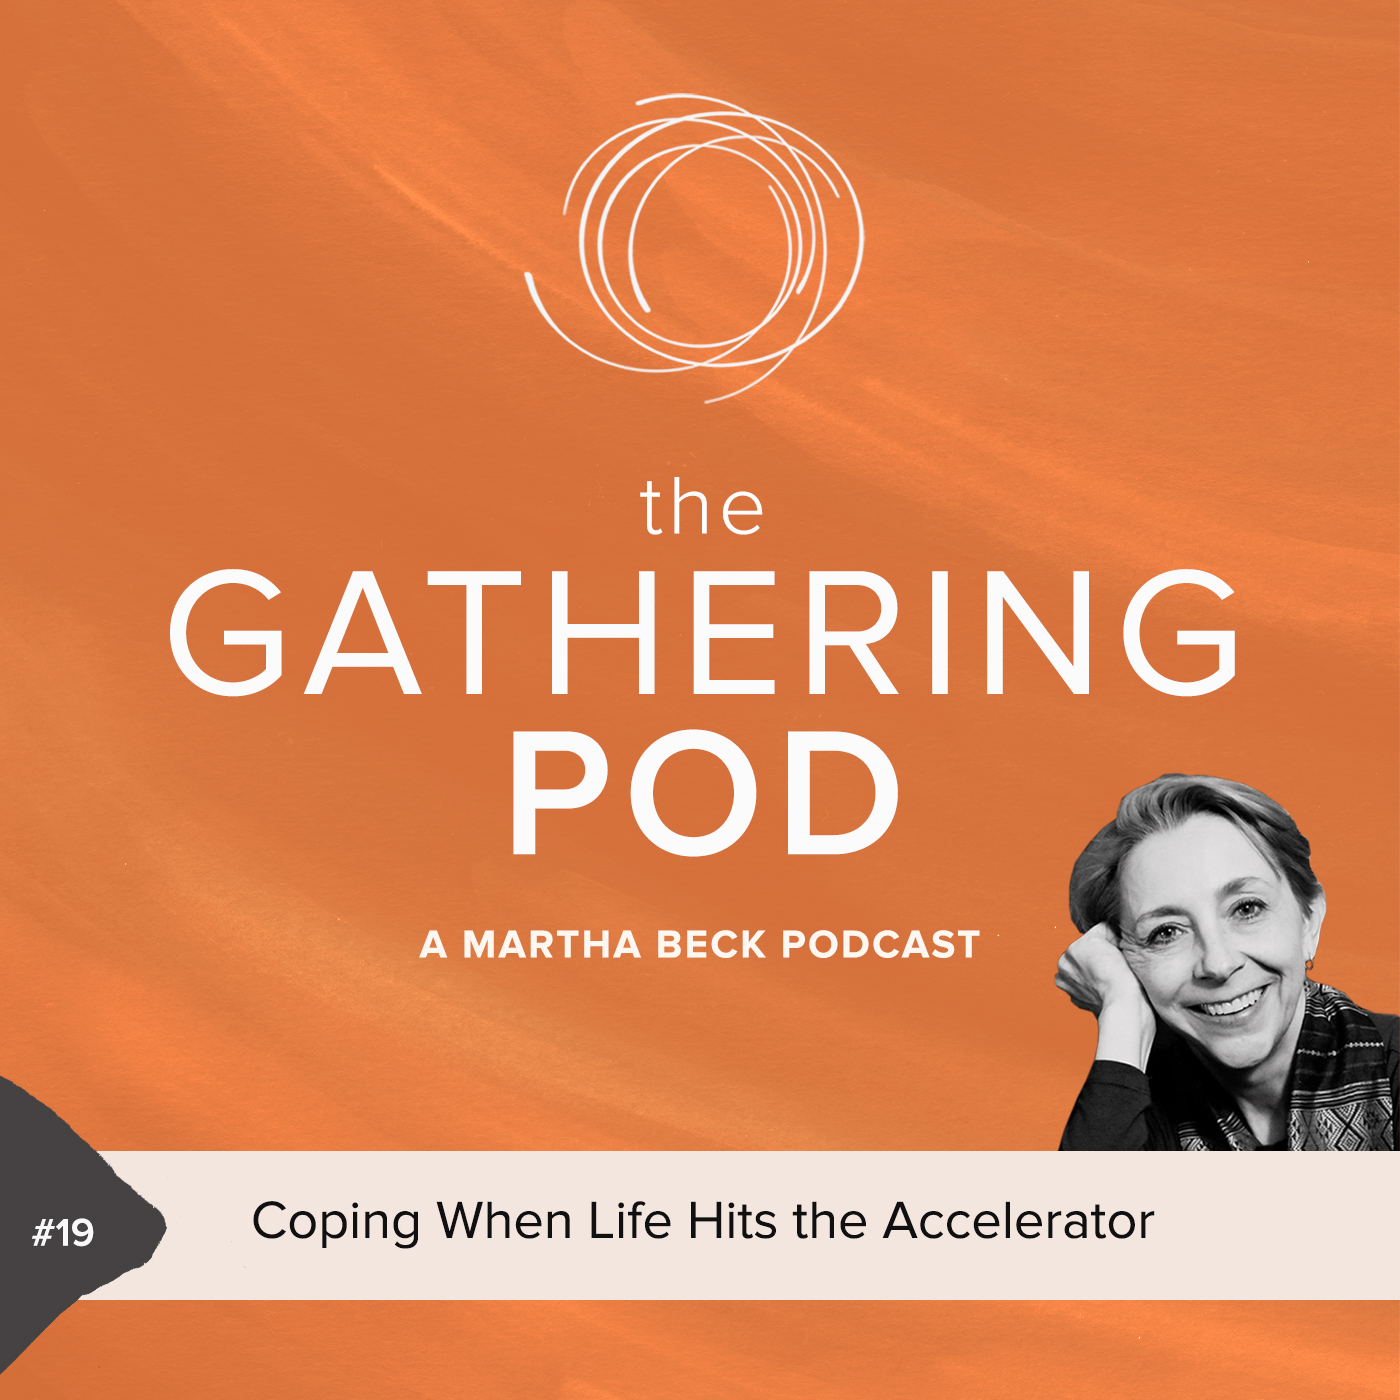 Image for The Gathering Pod A Martha Beck Podcast Episode #19 Coping When Life Hits the Accelerator